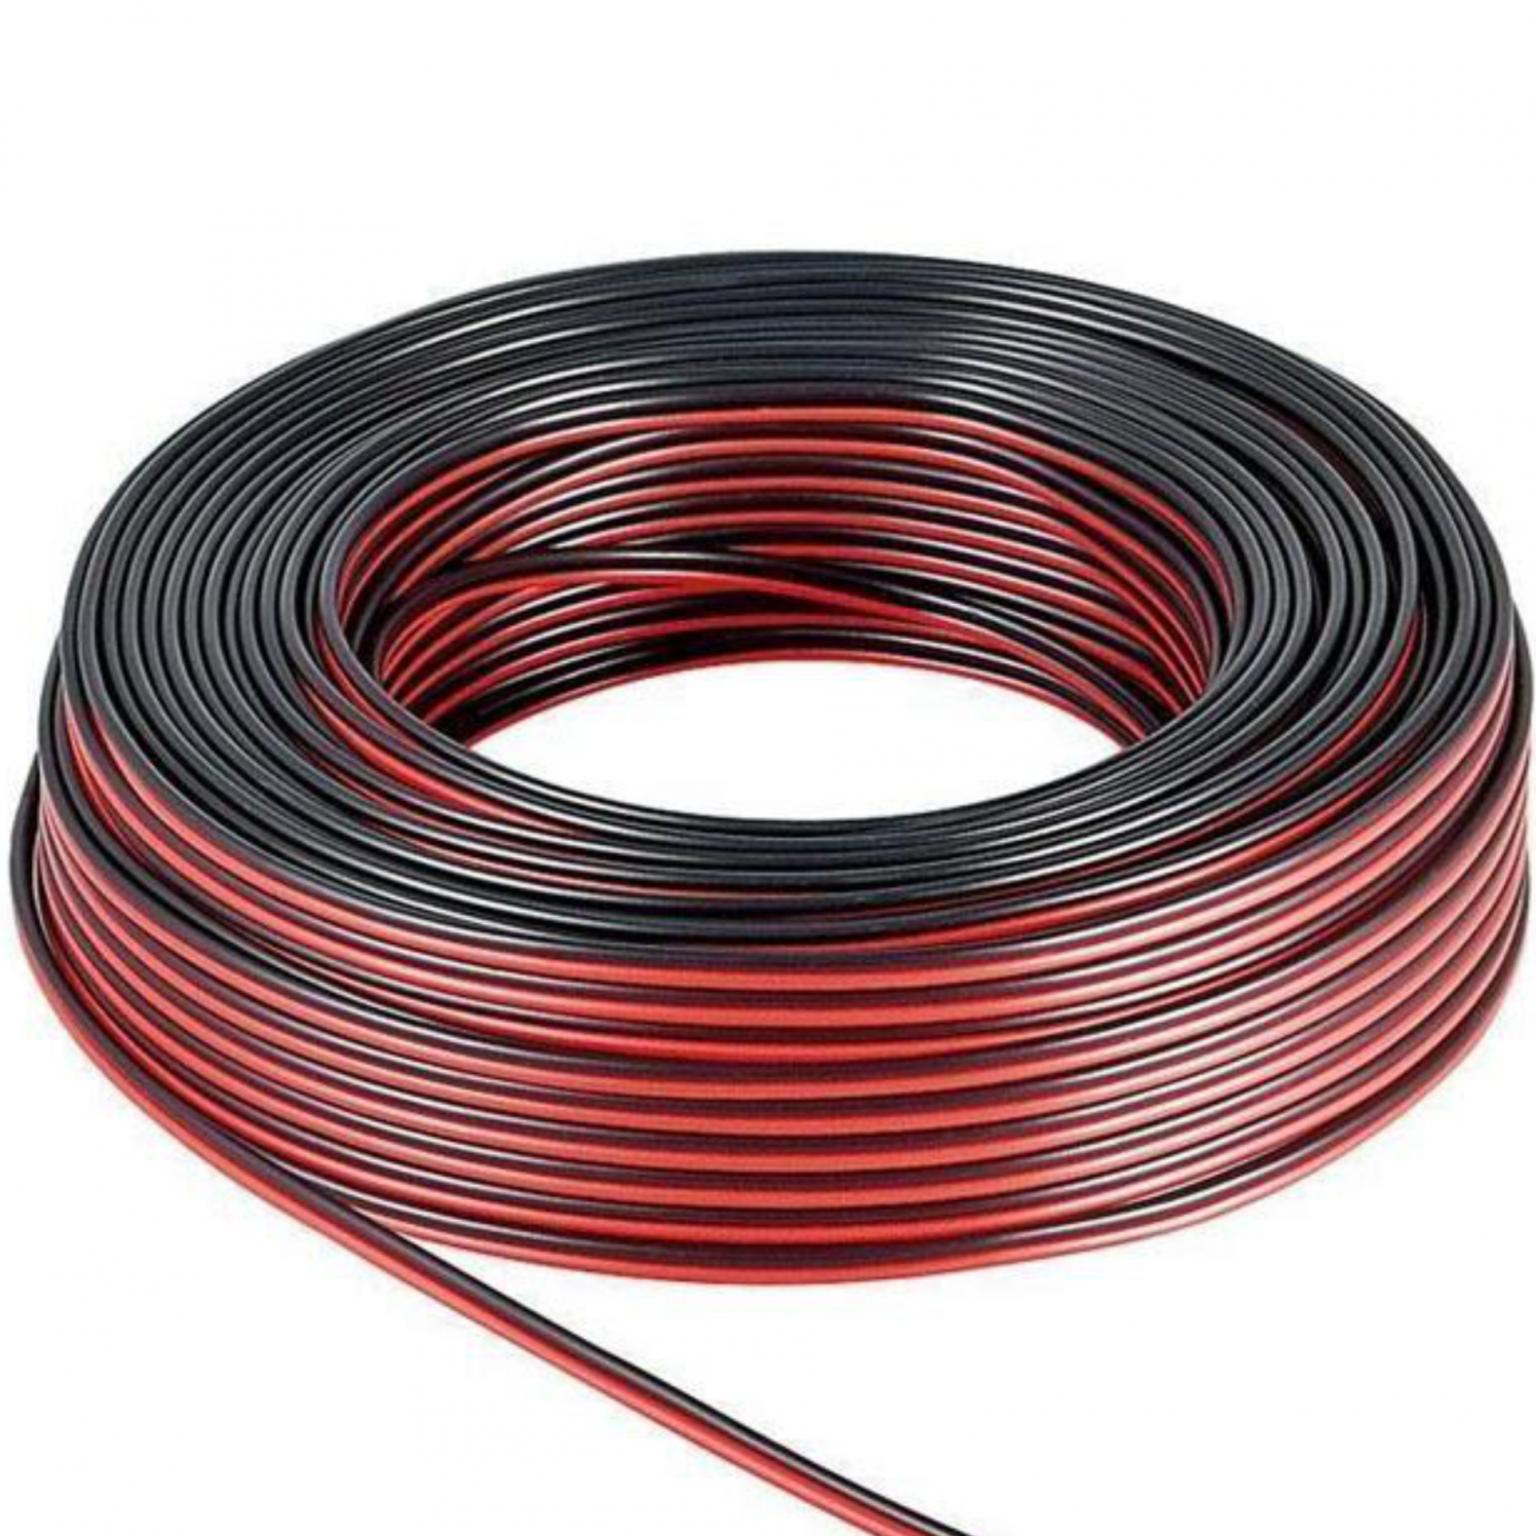 Image of Speaker cable red/black 10 m roll, cable diameter 2 x 2,5 mm? - Goobay